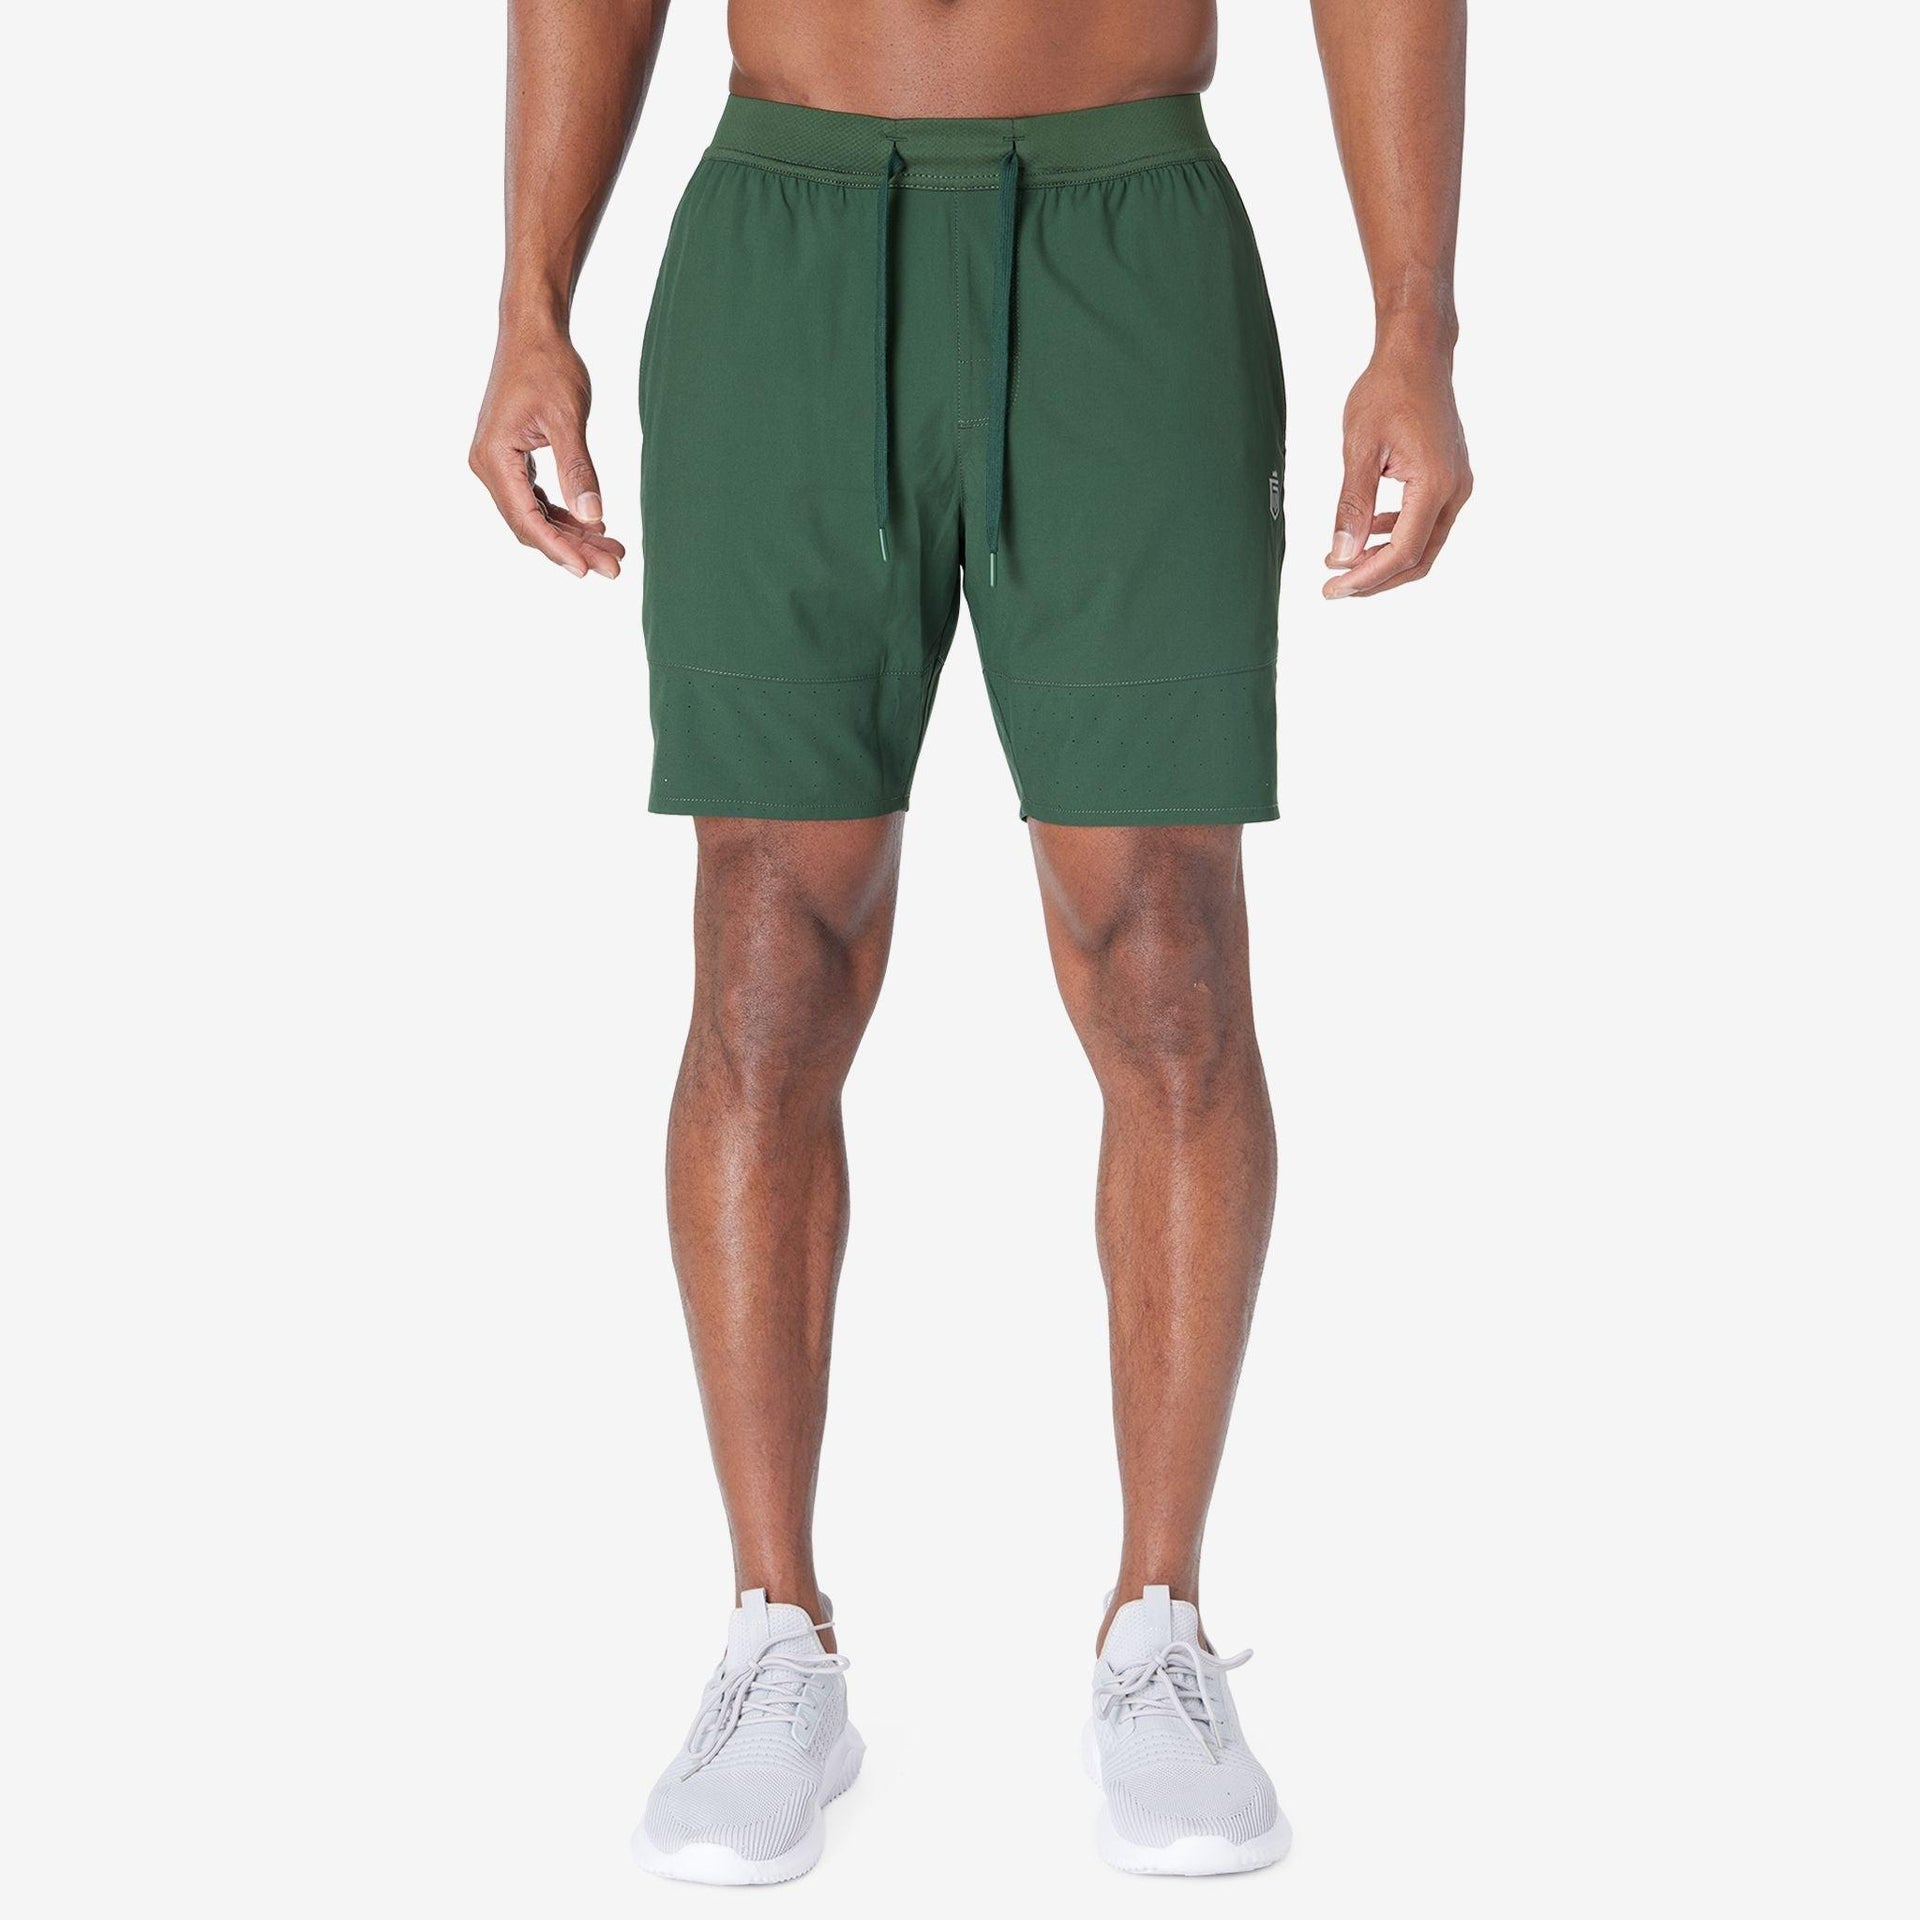 Stretch Performance Knit Wicking Recycled Polyester - Olive